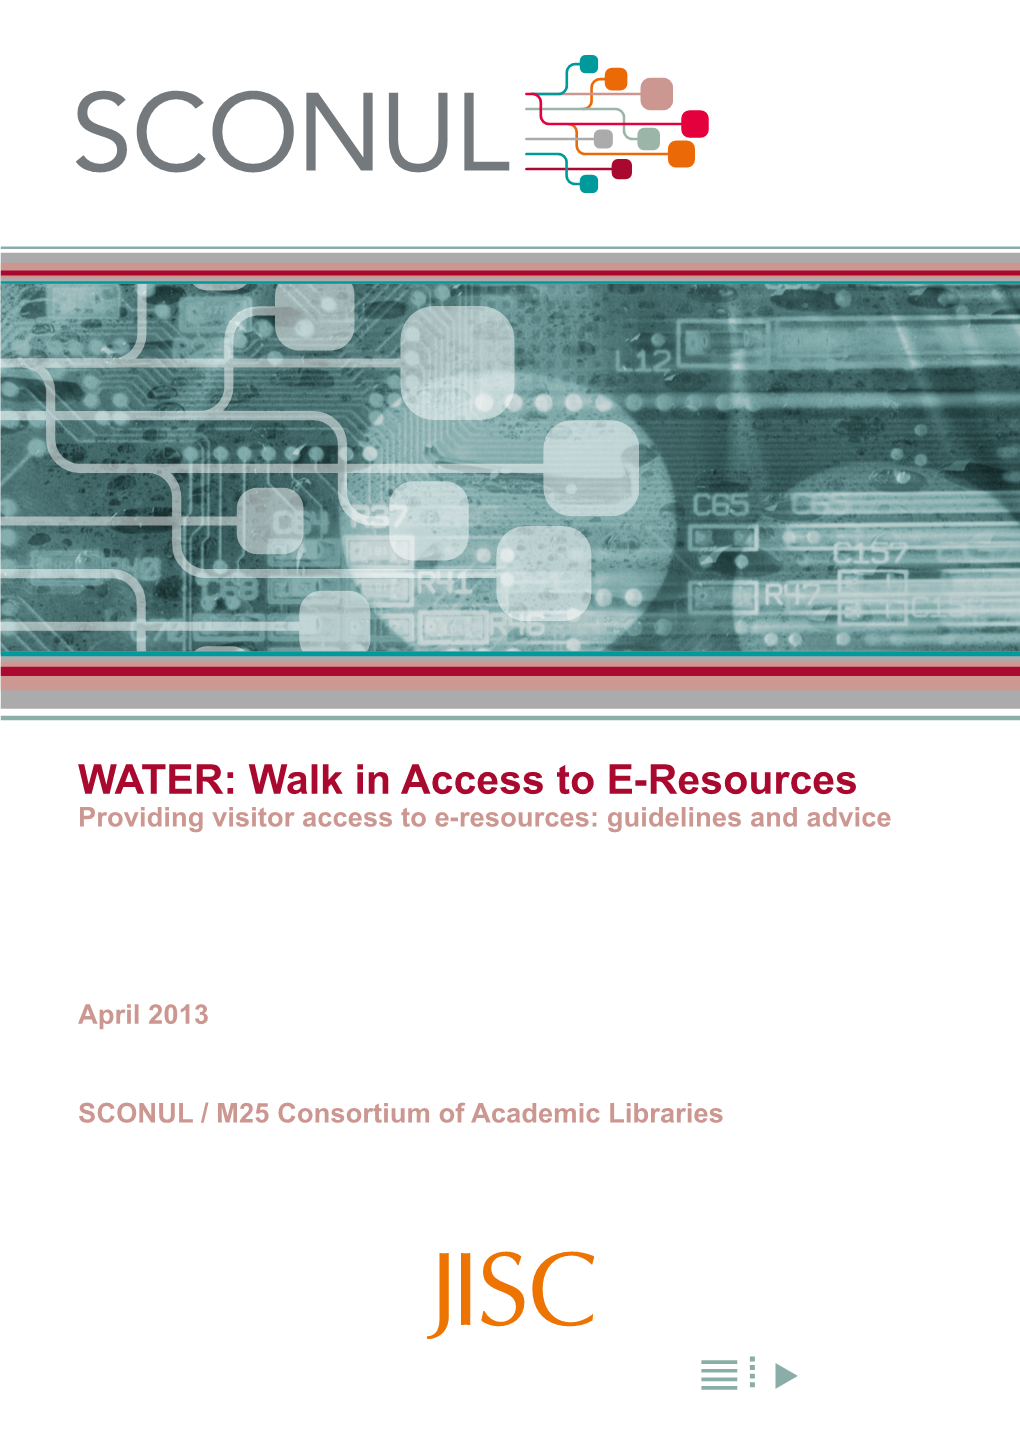 WATER: Walk in Access to E-Resources Providing Visitor Access to E-Resources: Guidelines and Advice